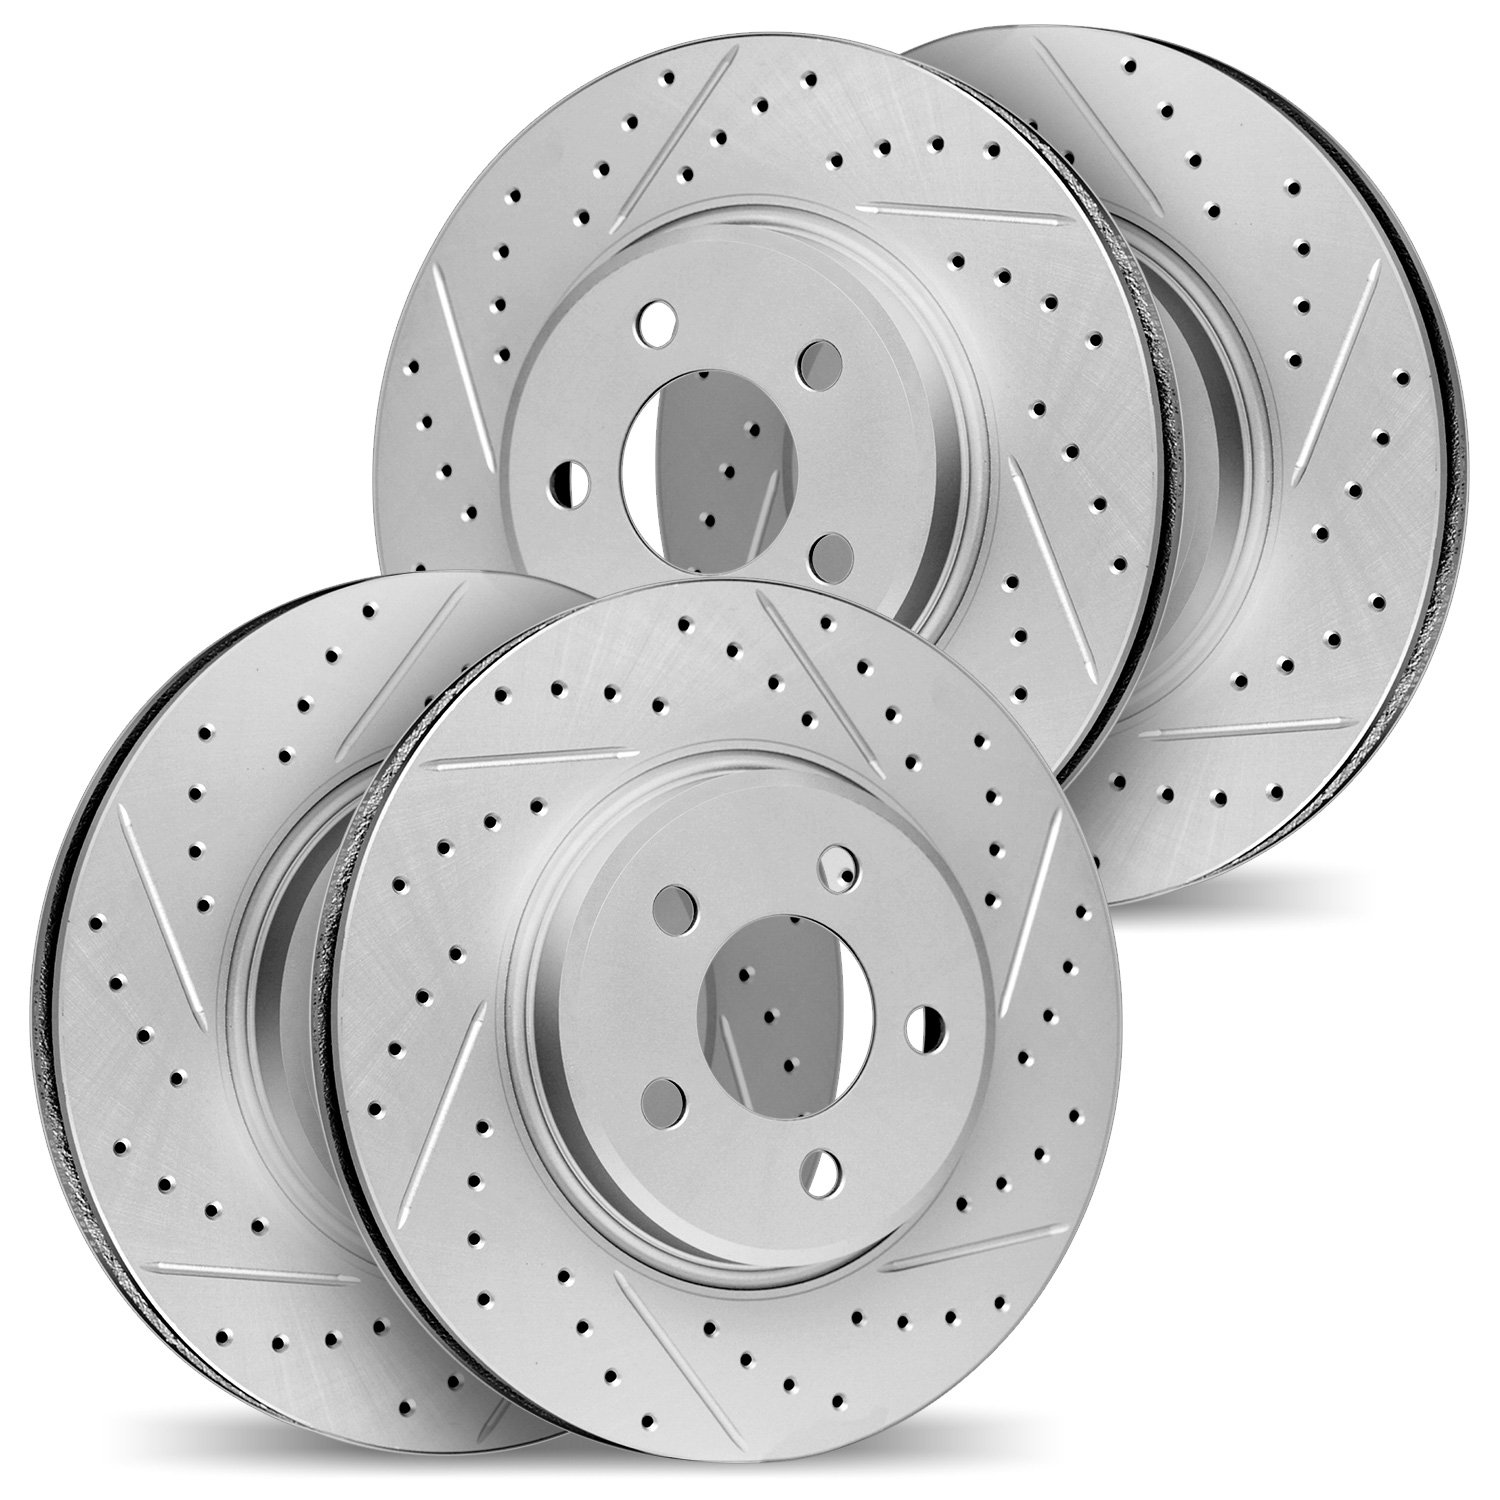 2004-67060 Geoperformance Drilled/Slotted Brake Rotors, 2014-2019 Infiniti/Nissan, Position: Front and Rear